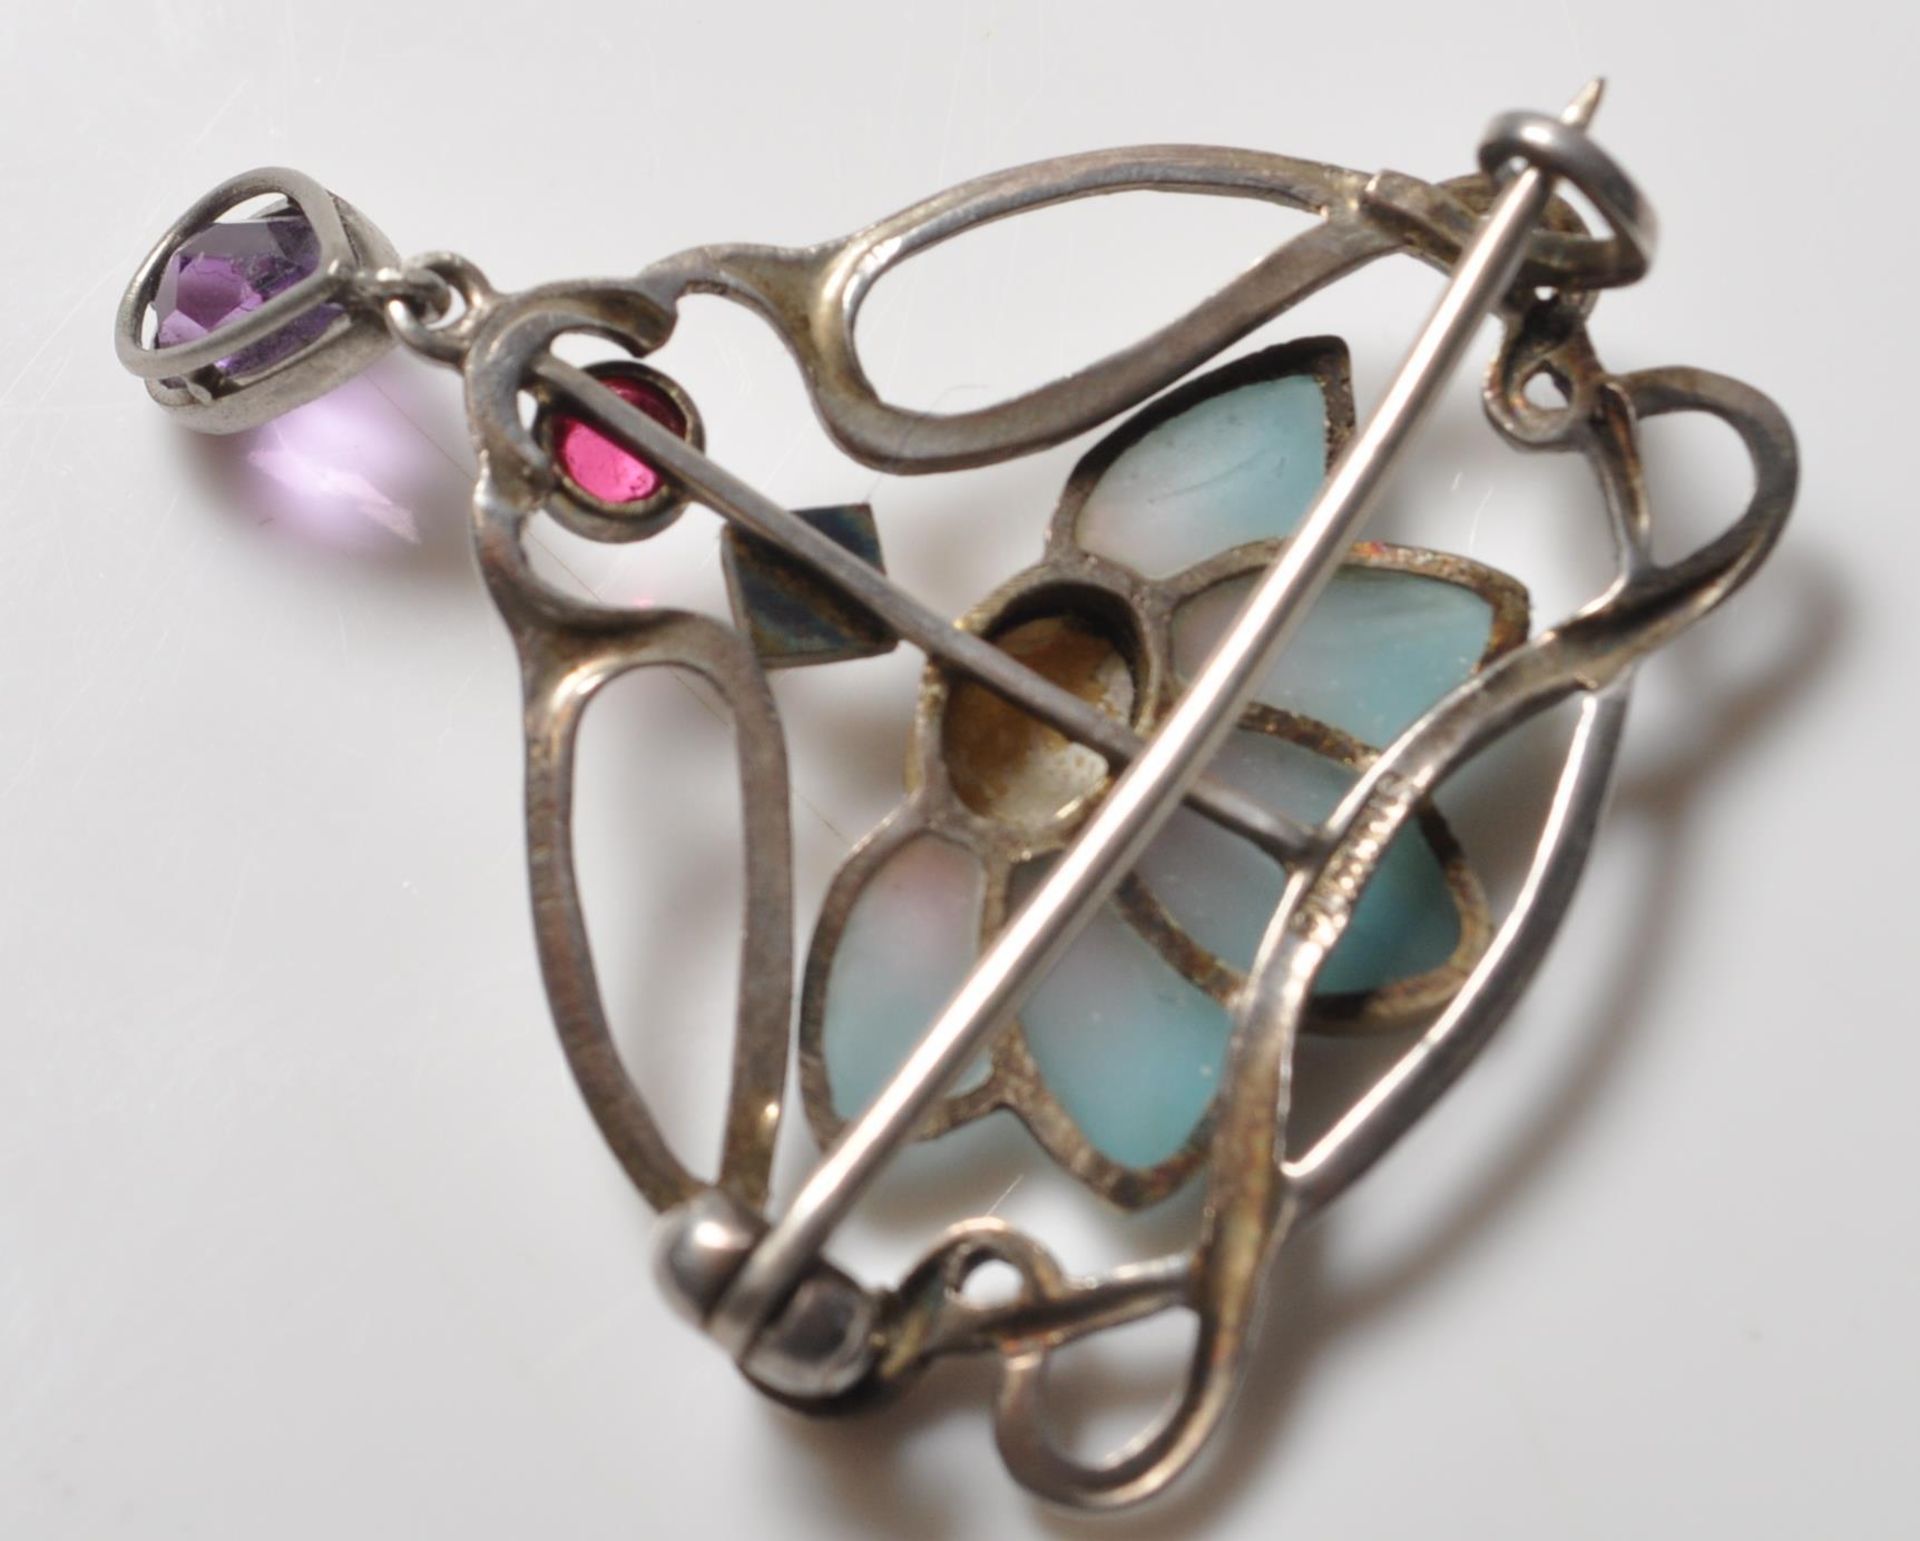 ART NOUVEAU SILVER AND PILQIE A JOUR BROOCH - Image 6 of 6